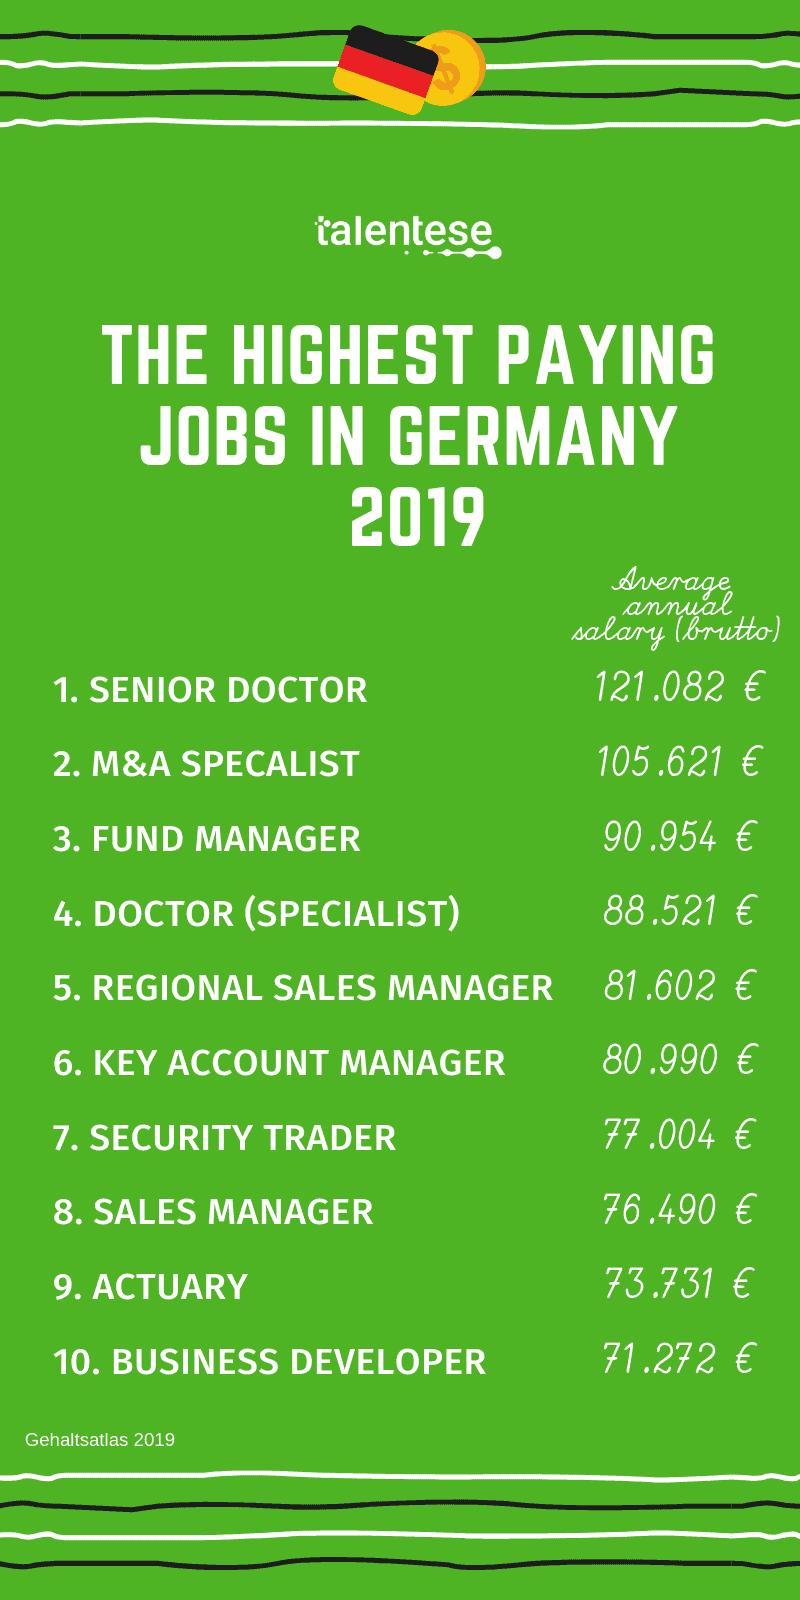 HIGHEST PAYING JOBS IN GERMANY 2019